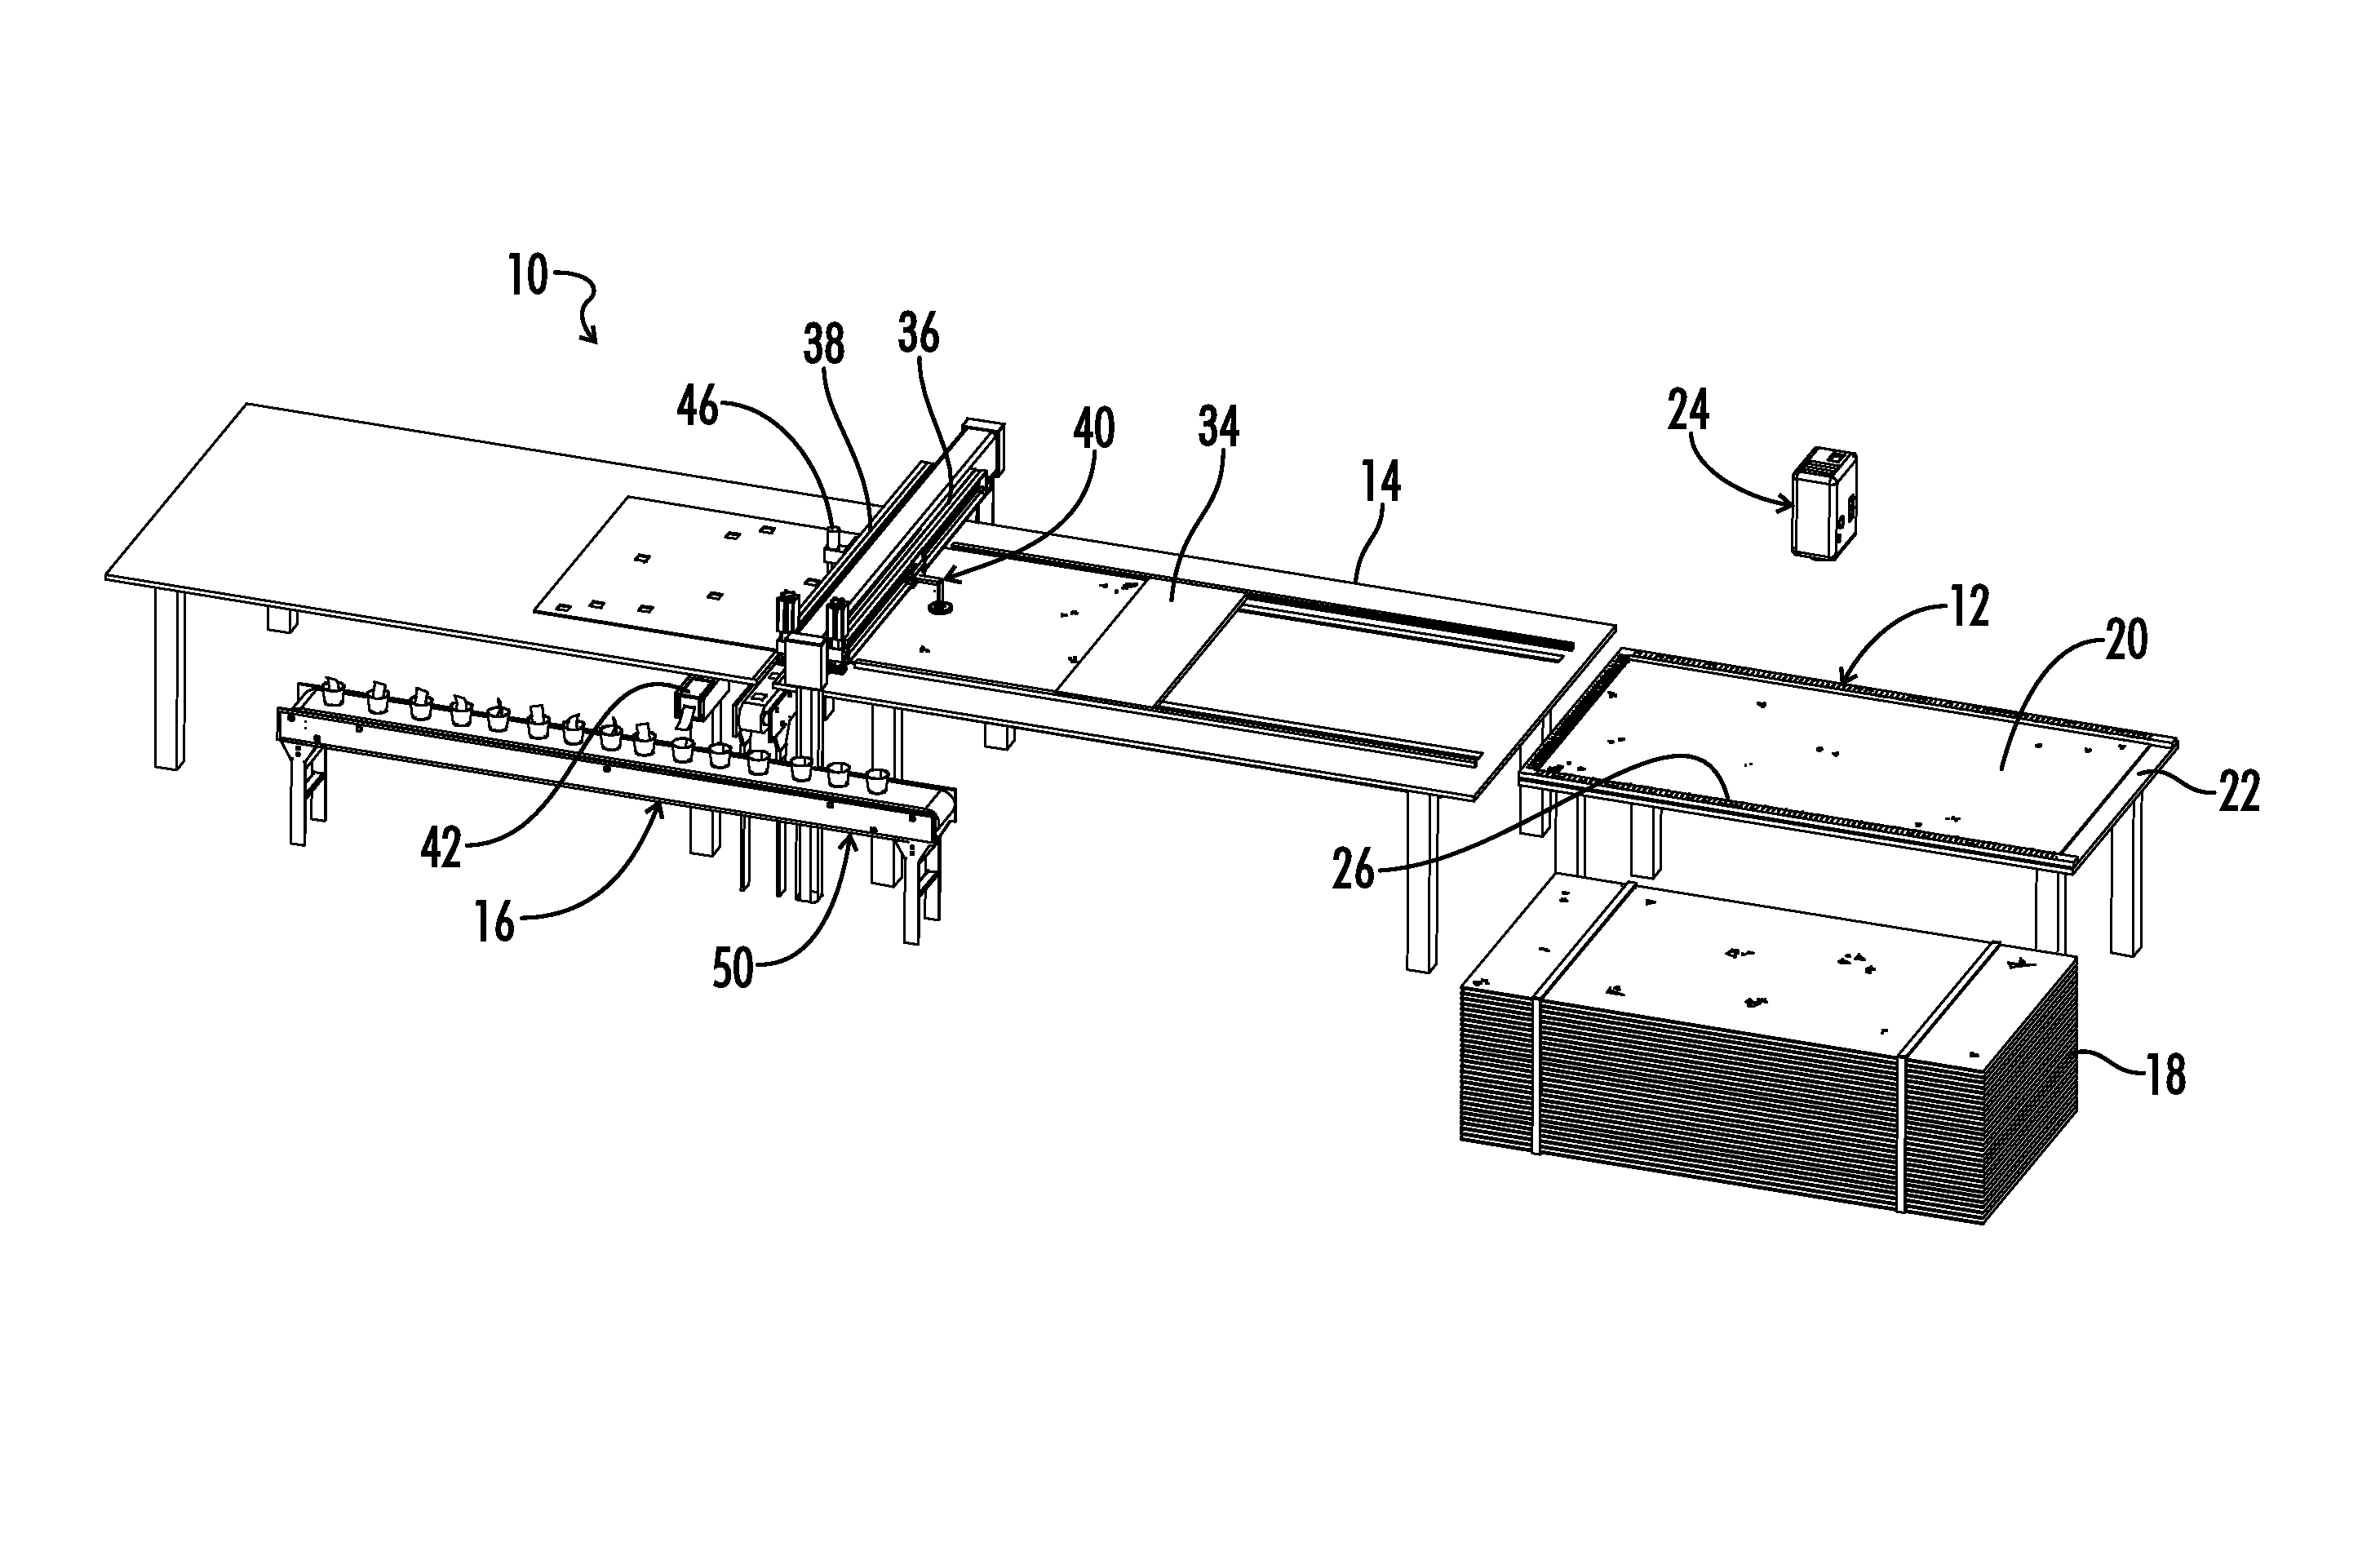 Automated fragment collection apparatus